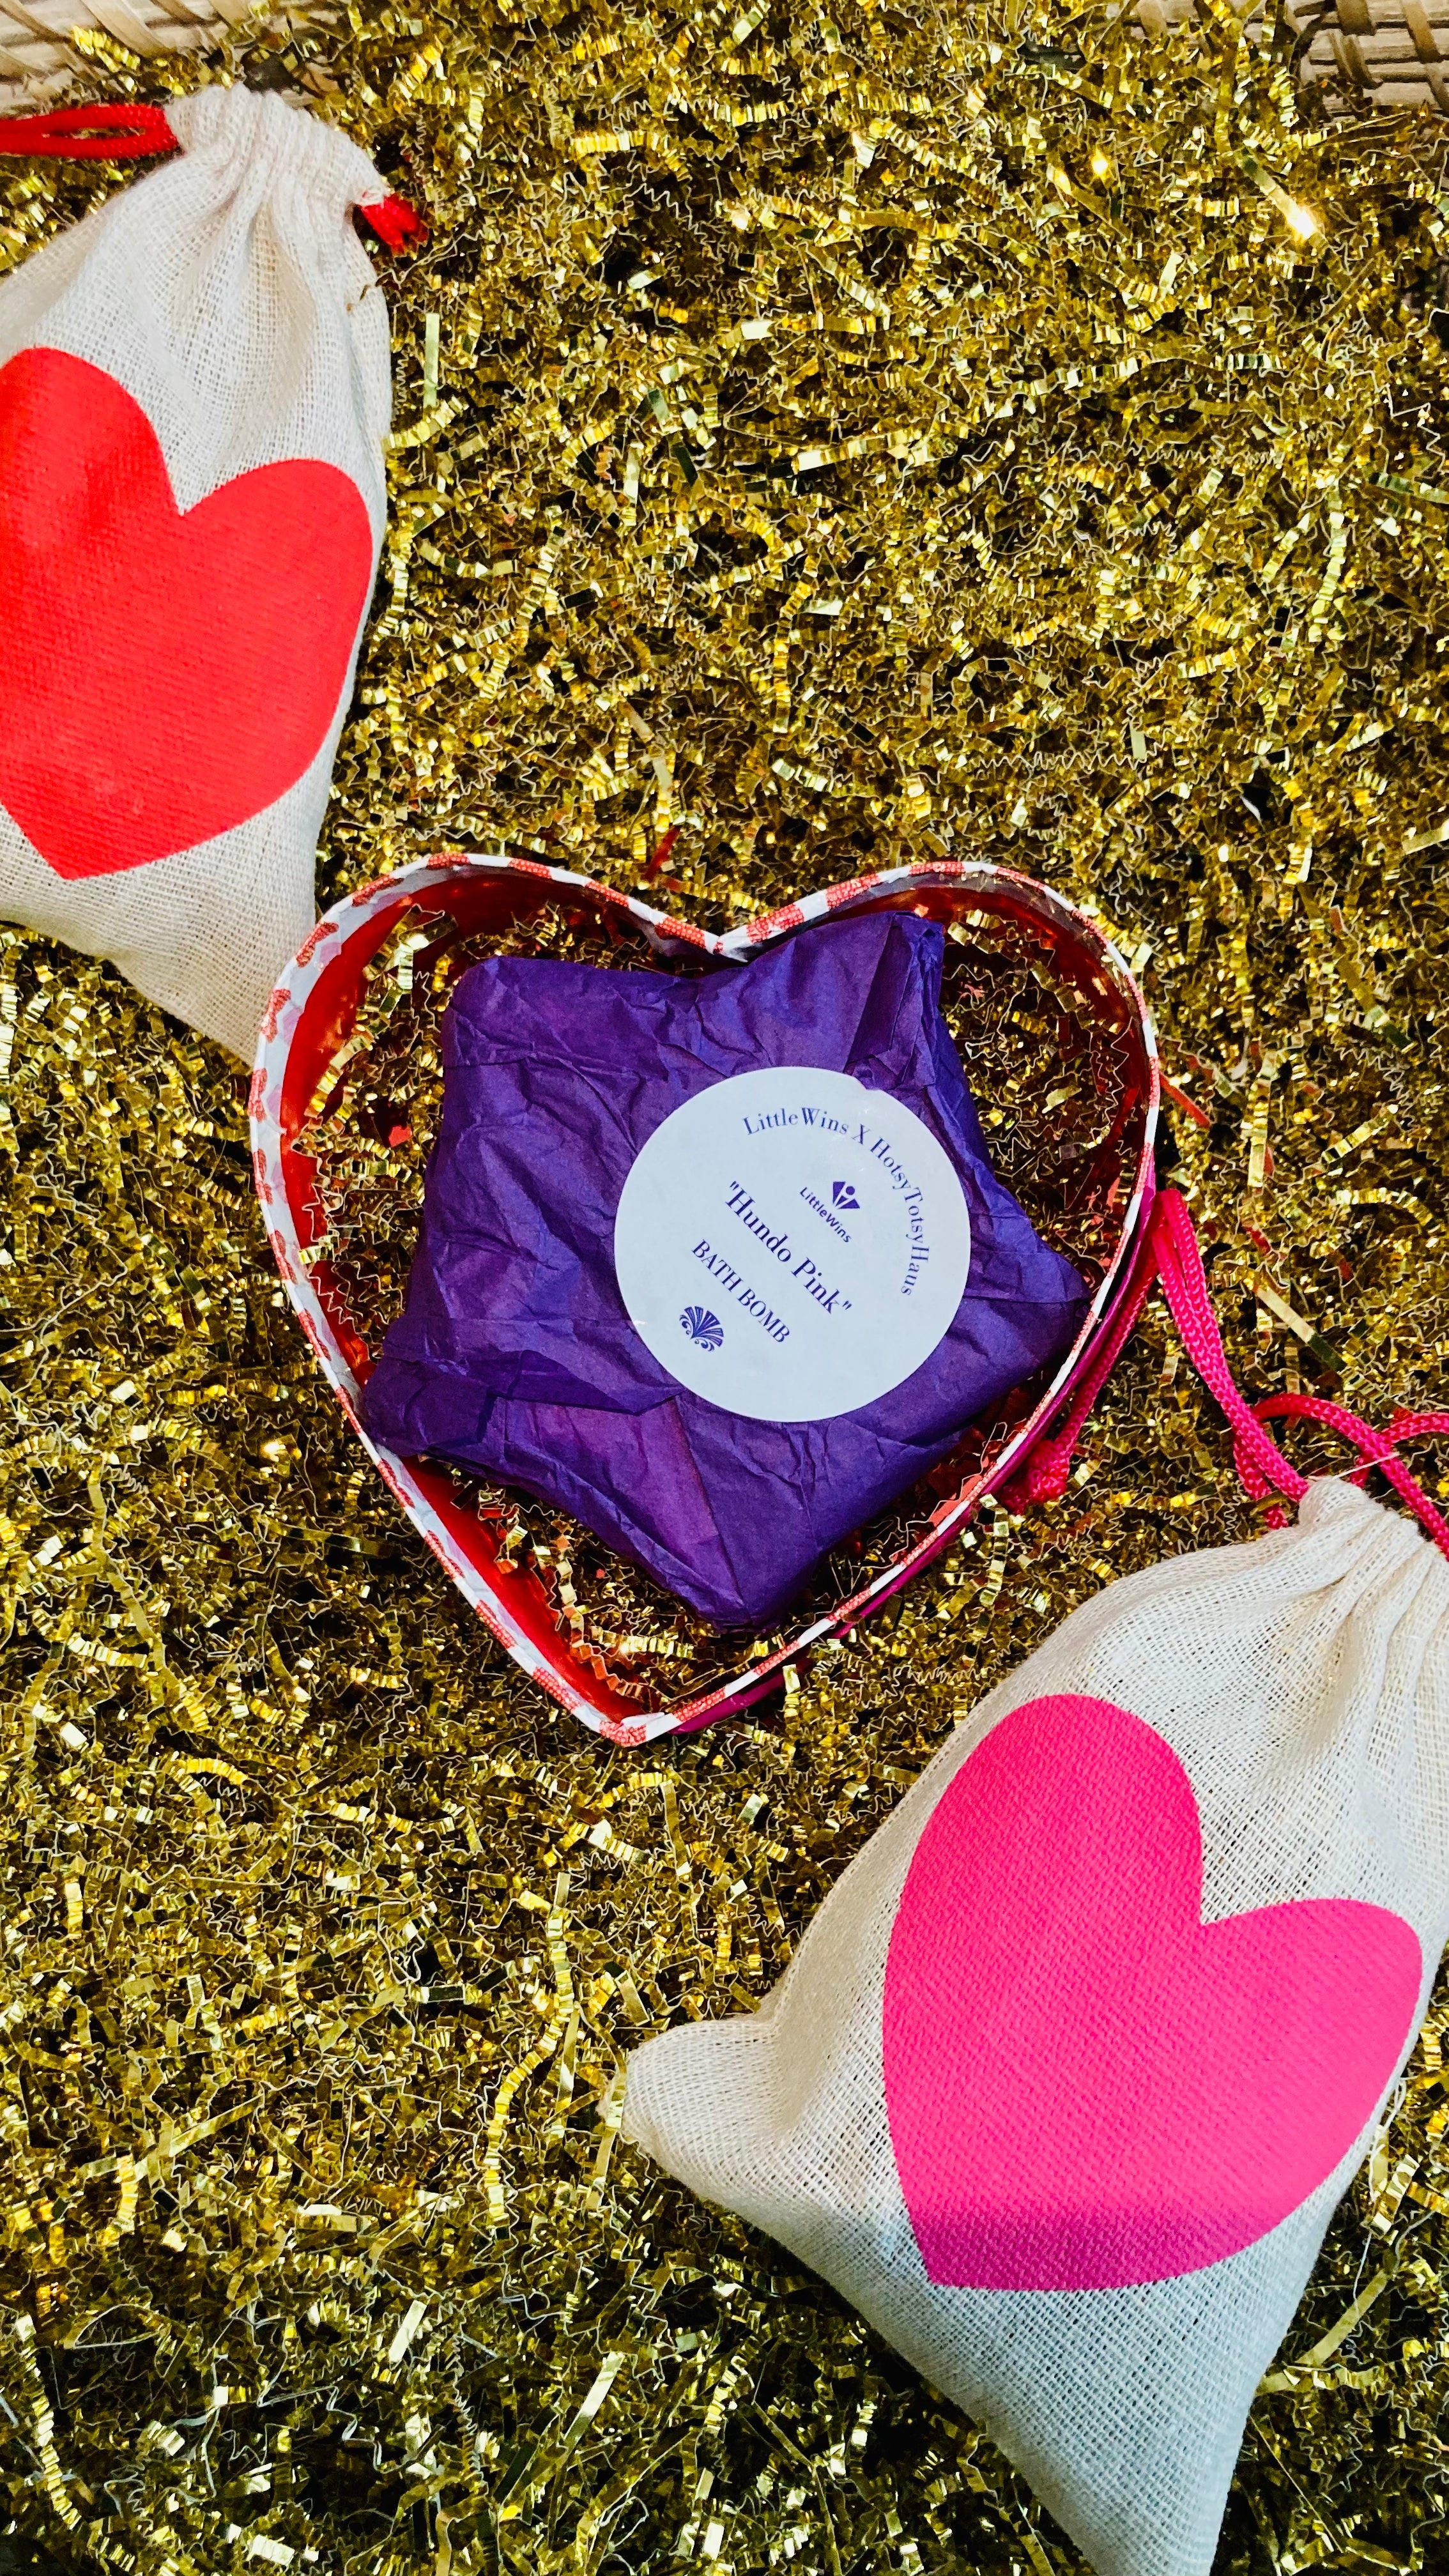 FOR THE LOVE - Bath Bomb Gift Box